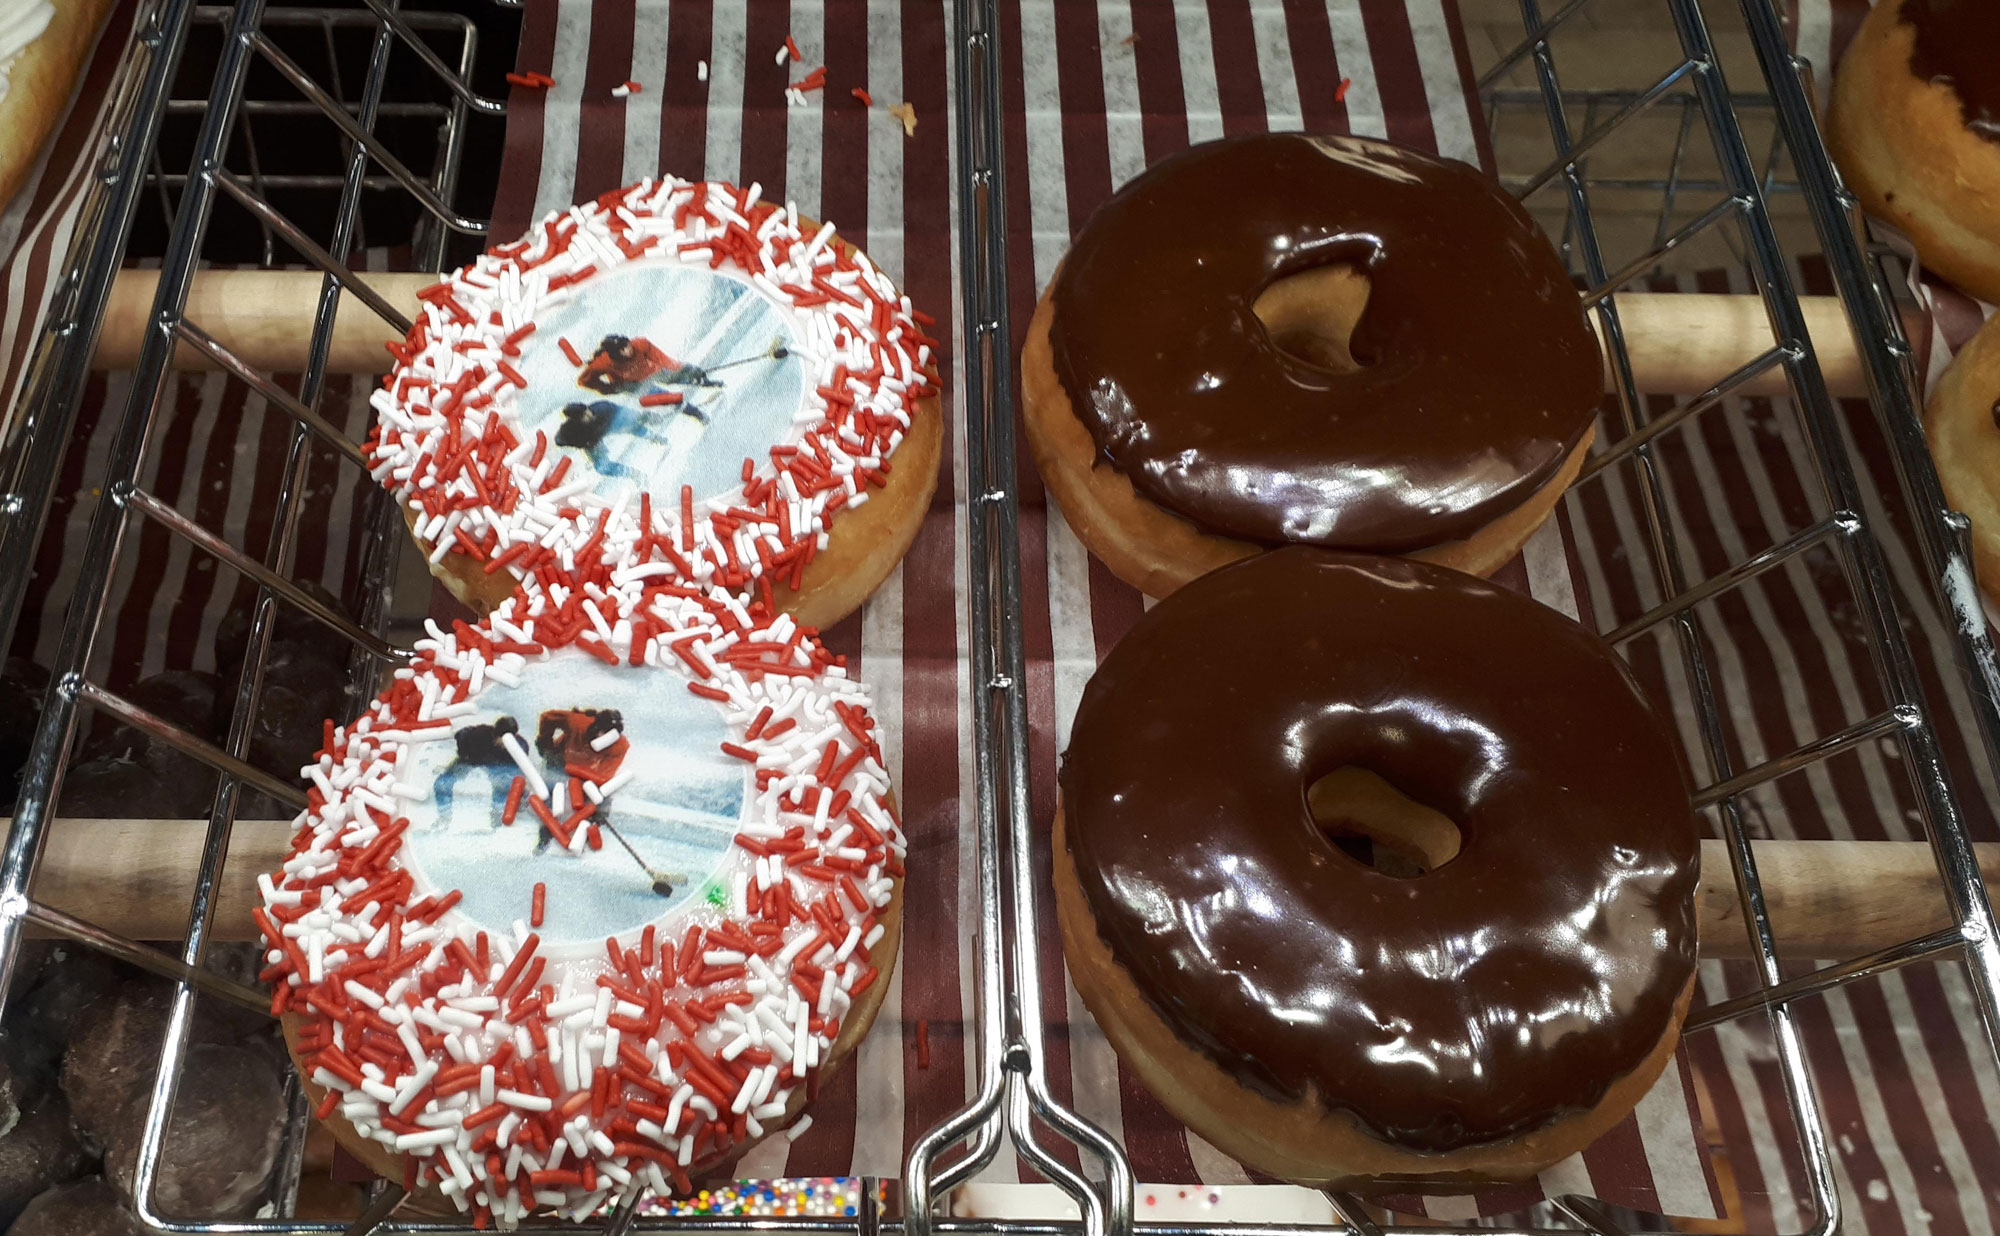 A rack of donuts with red and white icing.